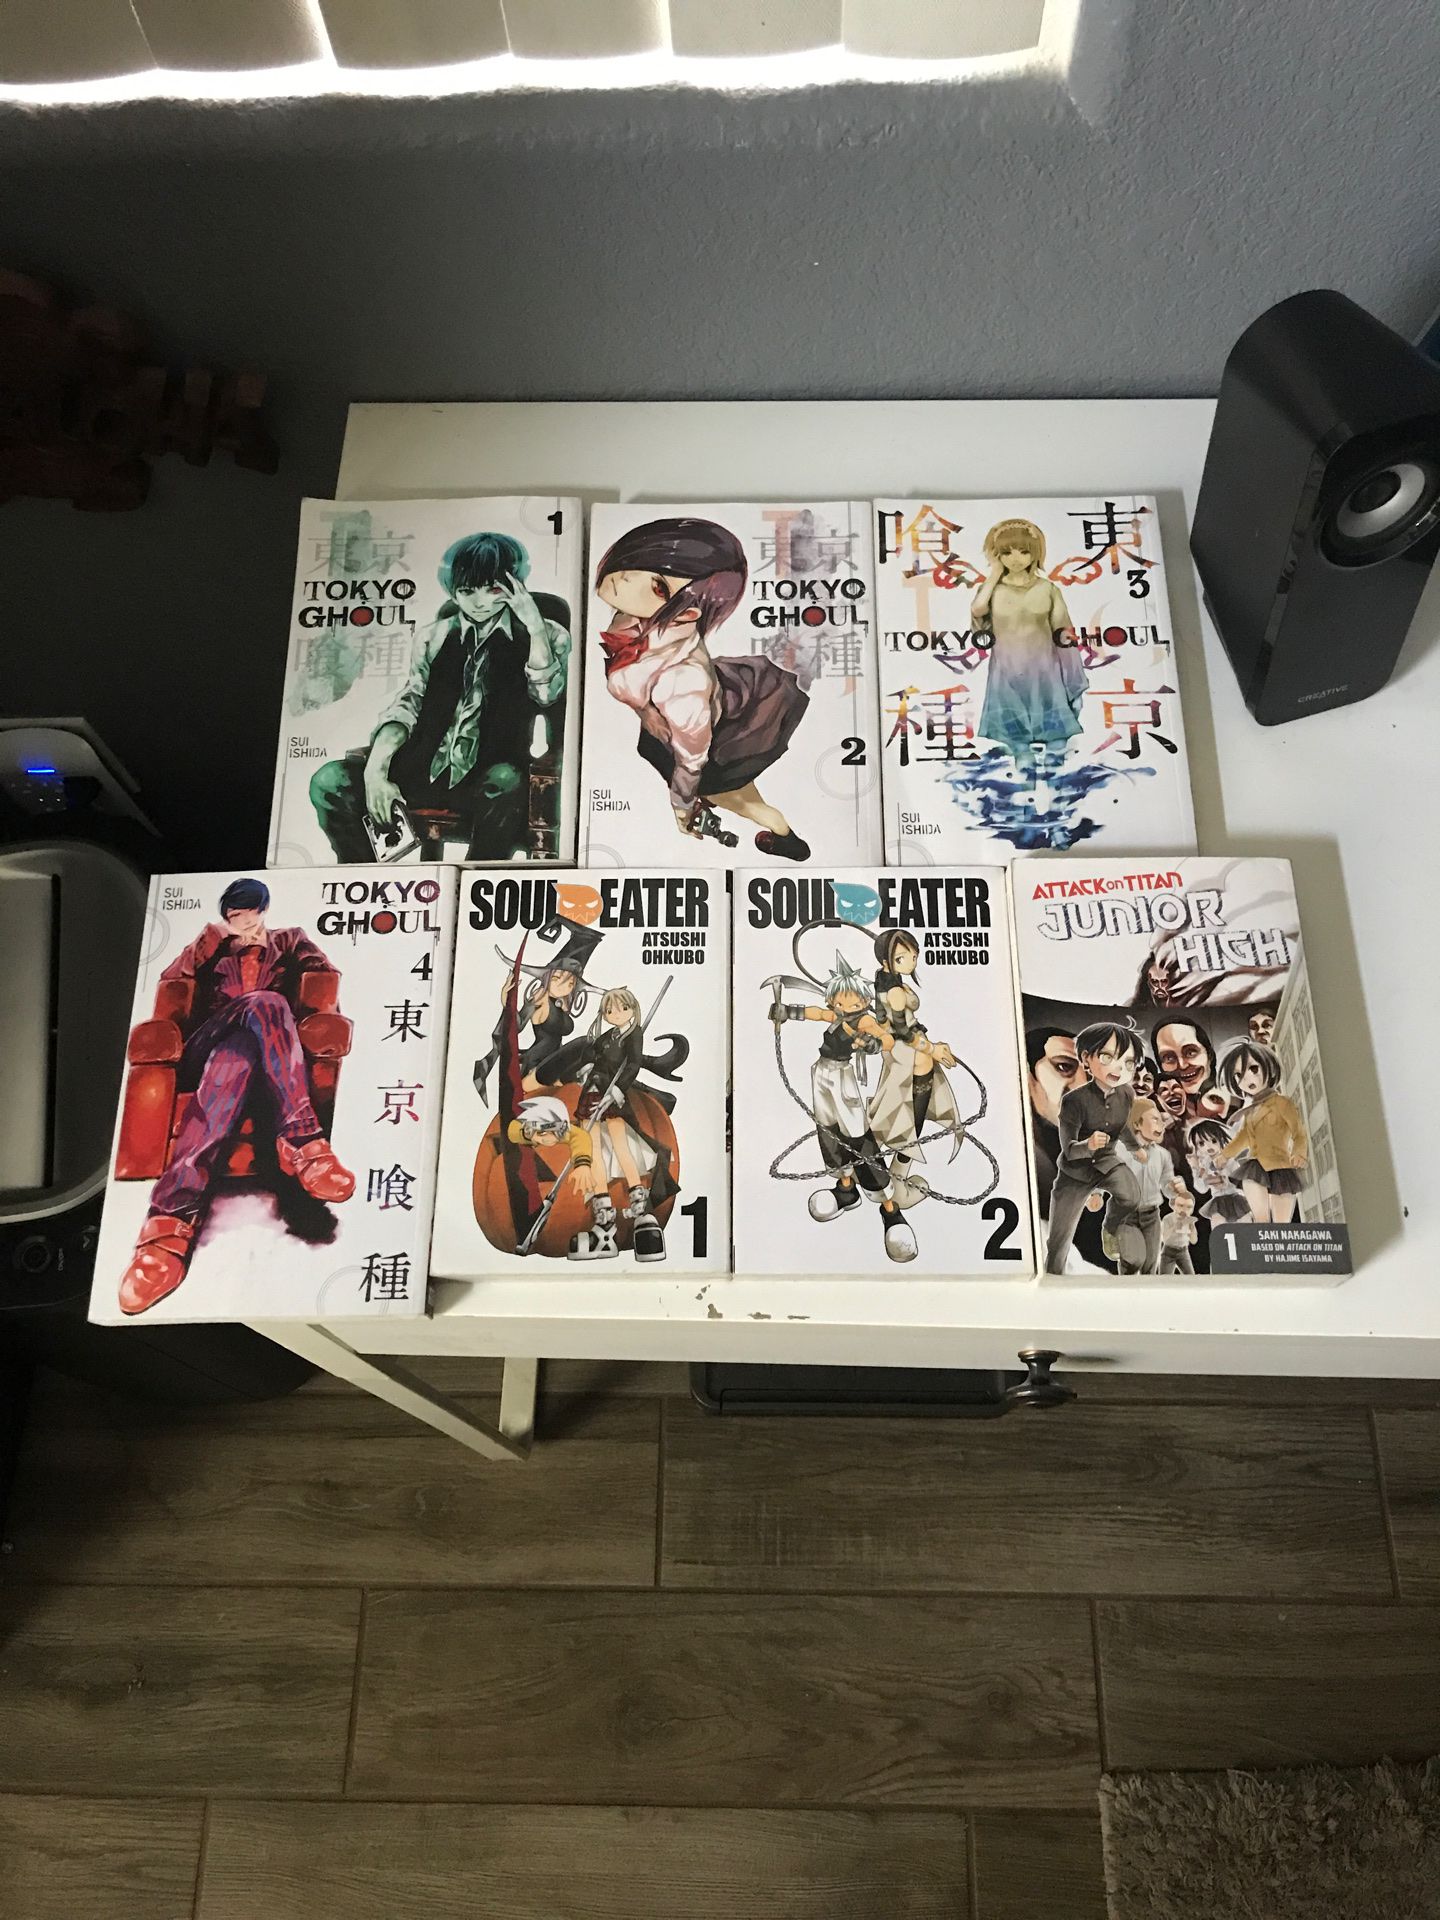 Manga tokyo goul,soul eater, and attack on titan